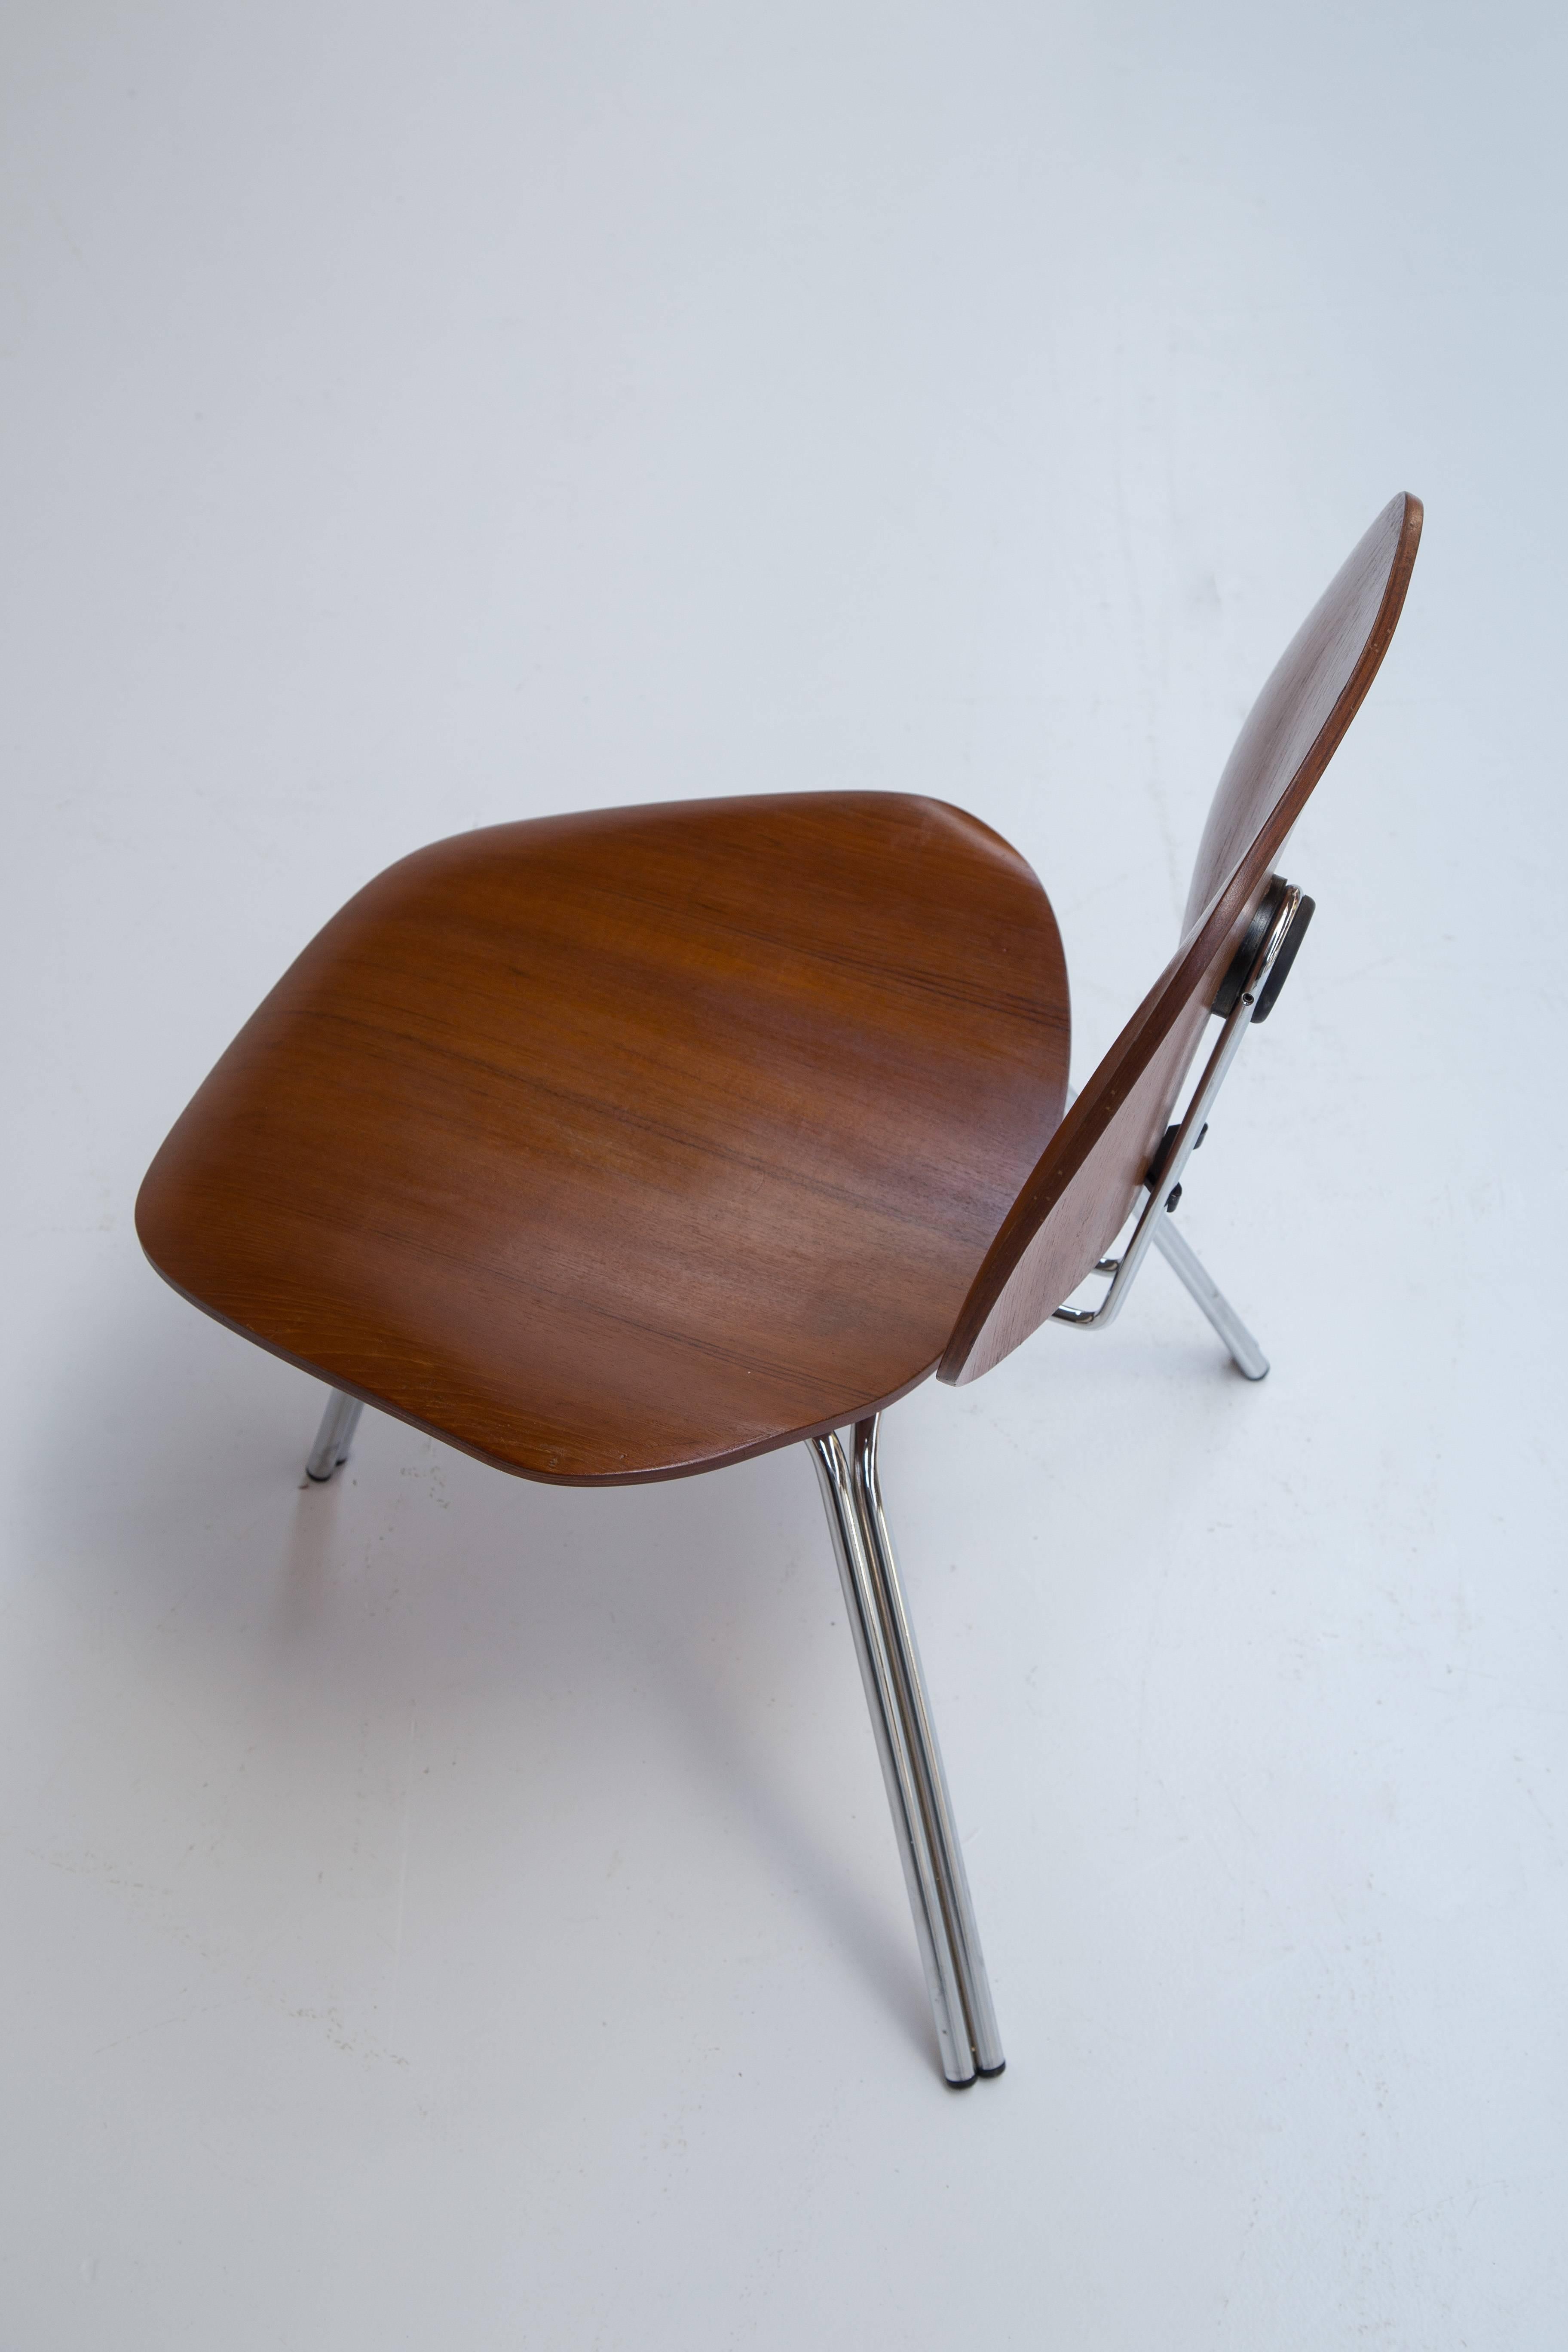 Rare pair of model P31 three-legged lounge chairs by Osvaldo Borsani for Tecno. Designed in 1957. Rosewood with chromed metal legs. Mostly seen with black feet. Very good condition. 1 chair remains the Tecno label on the back. Both in fantastic